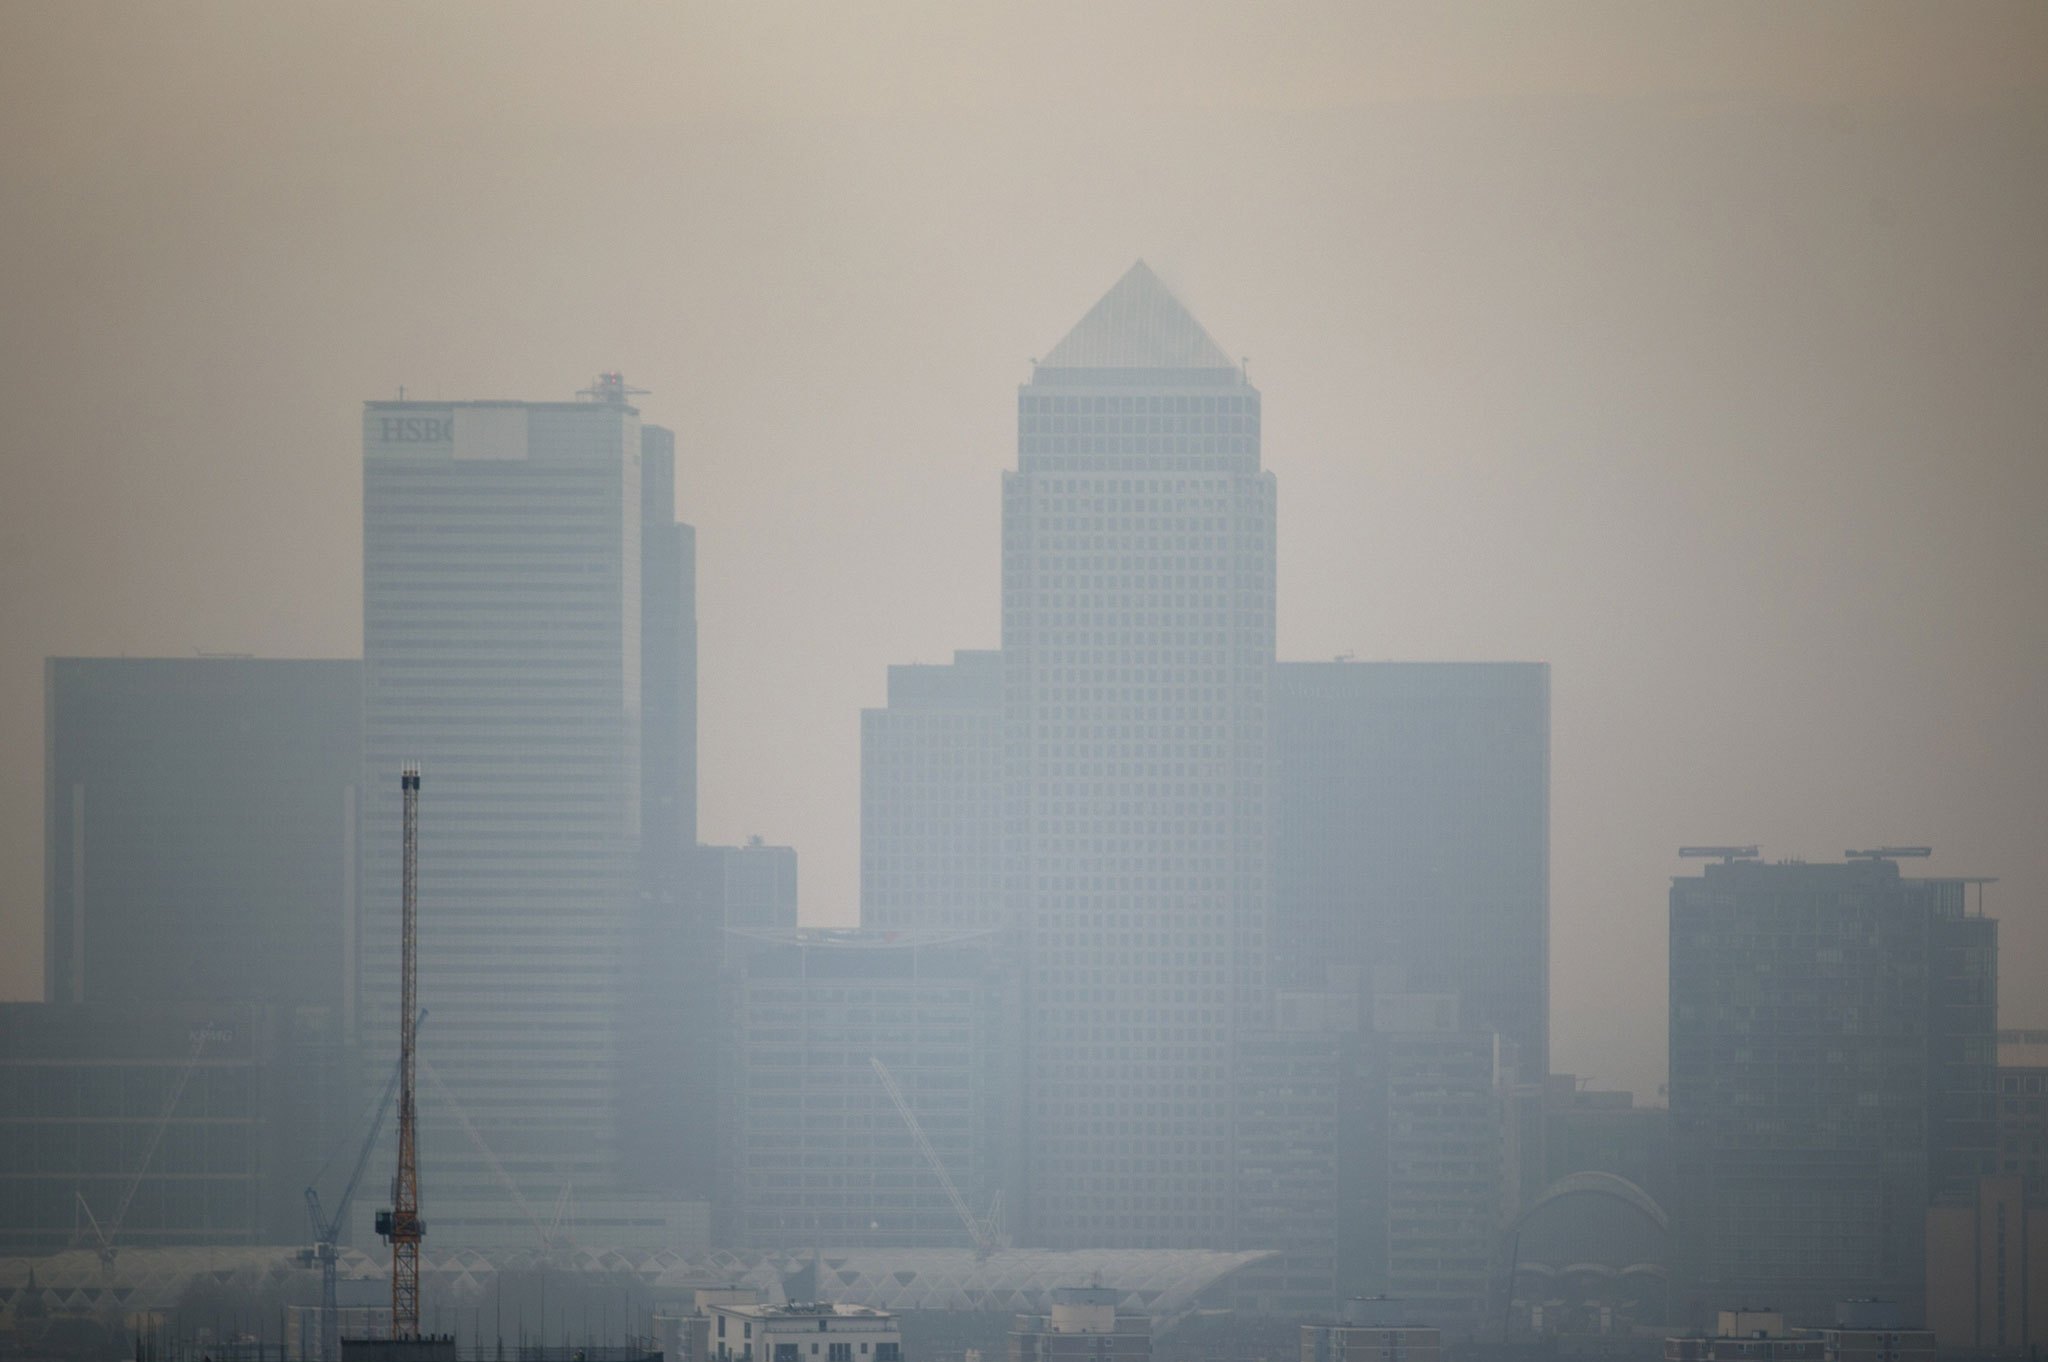 The skyscrapers of the Canary Wharf business district in London are shrouded in smog